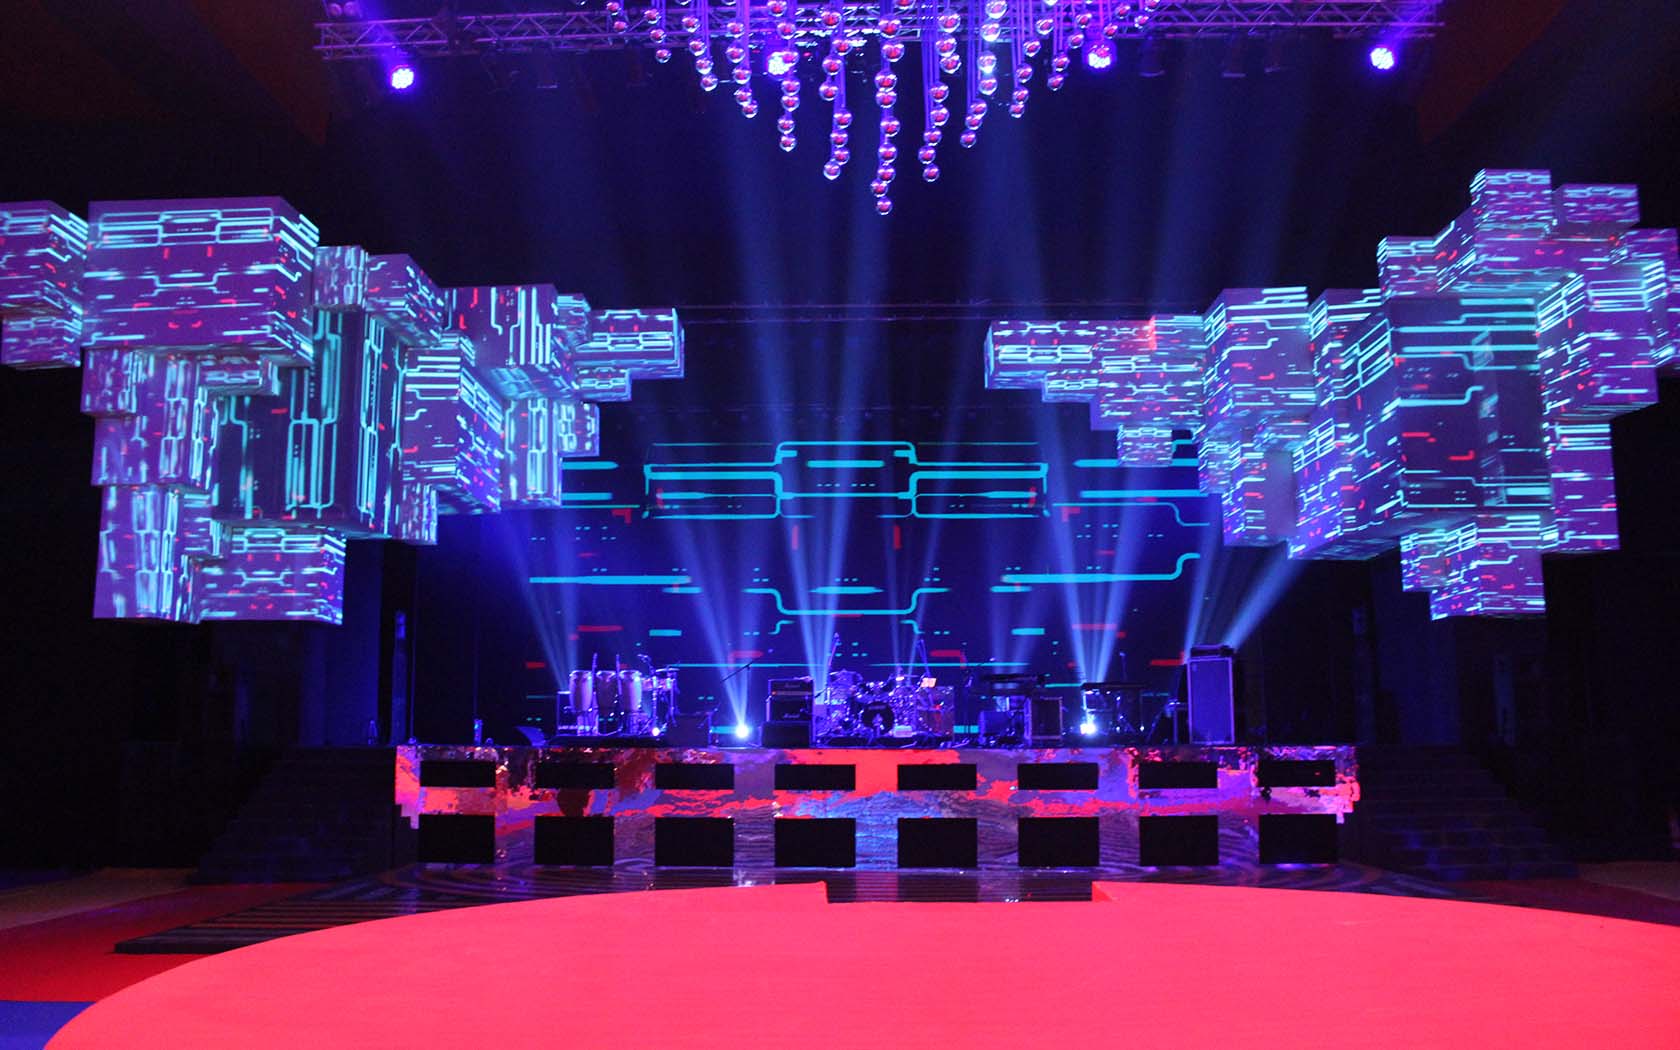   Environmental-Design   We design and execute video sets by working closely with top audio-video and technical teams to bring alive your special moments. Our vision is to provide immersive environments that touch the five senses. To create these del